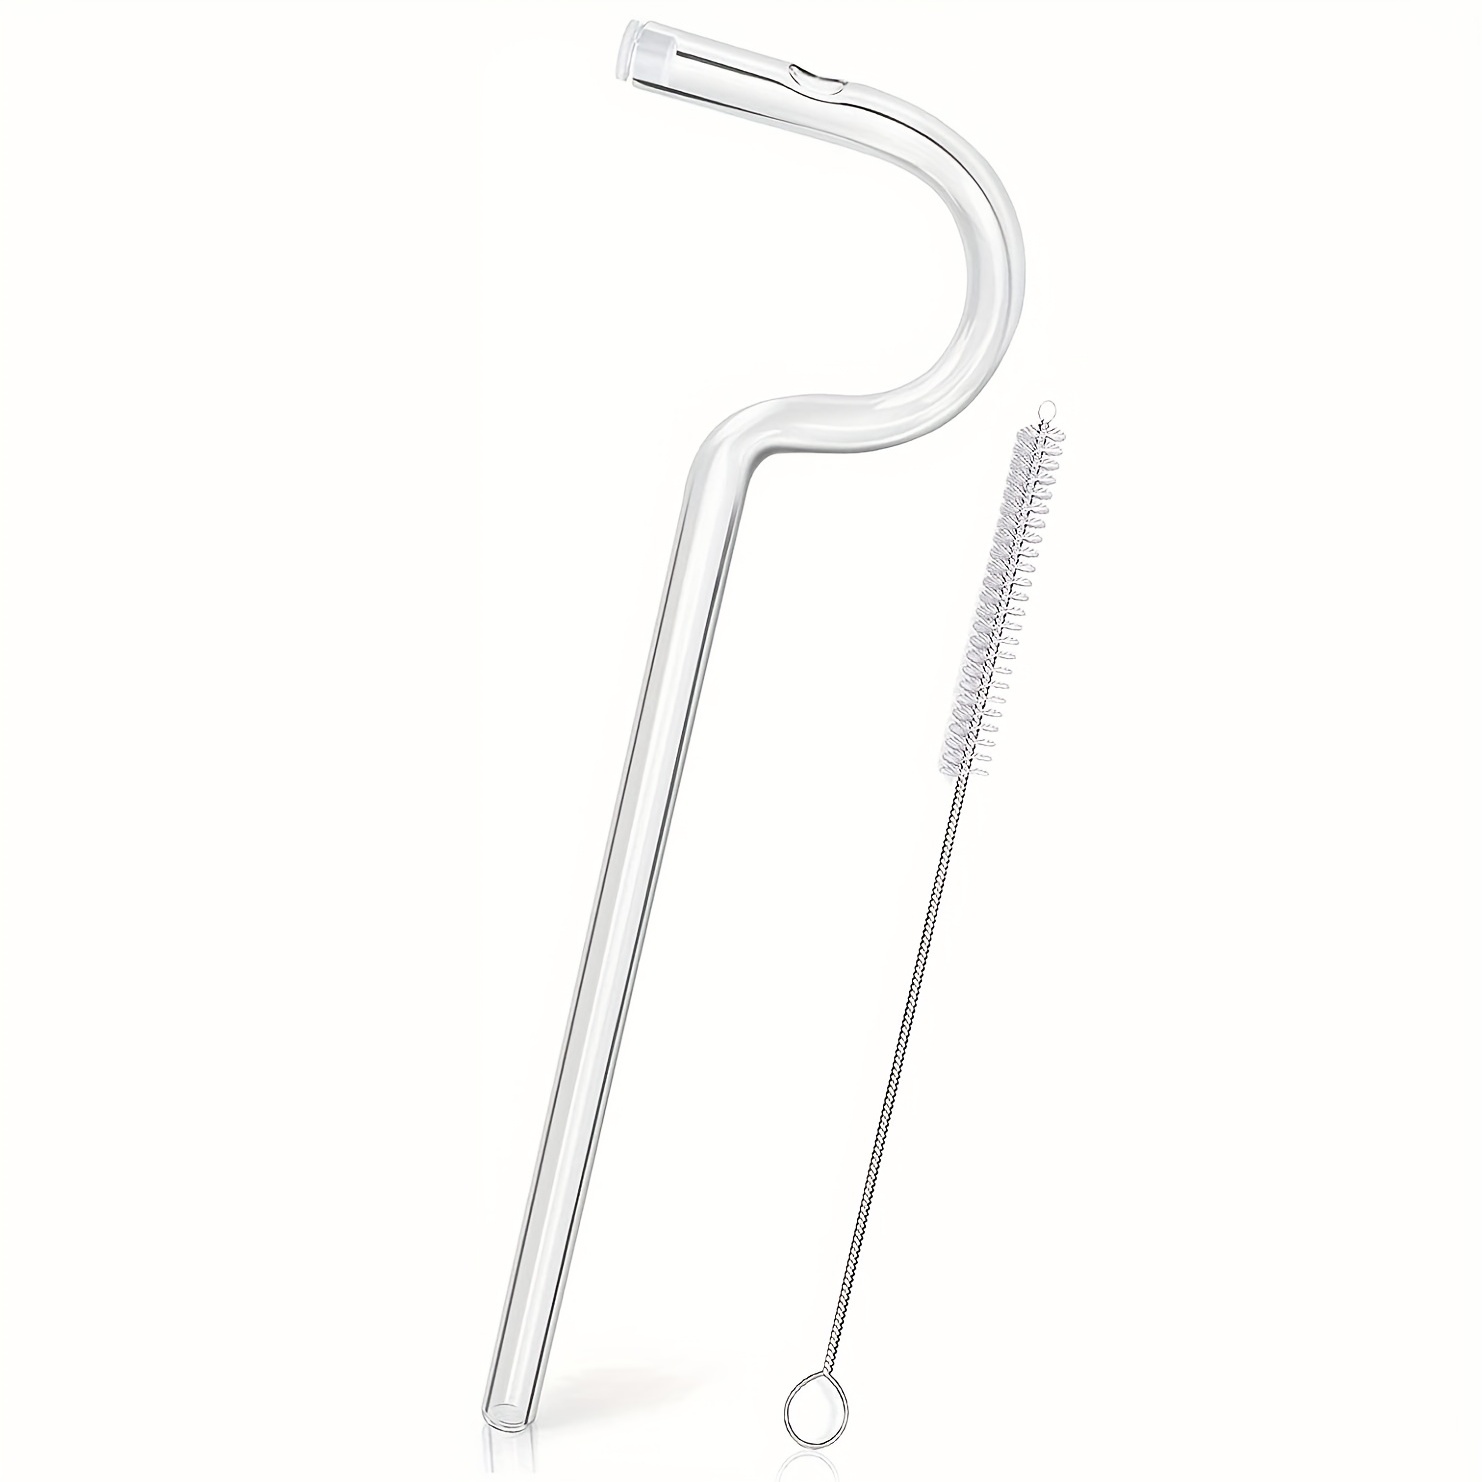 Anti Wrinkle Straw,Flute Style Design for Engaging, No Wrinkle